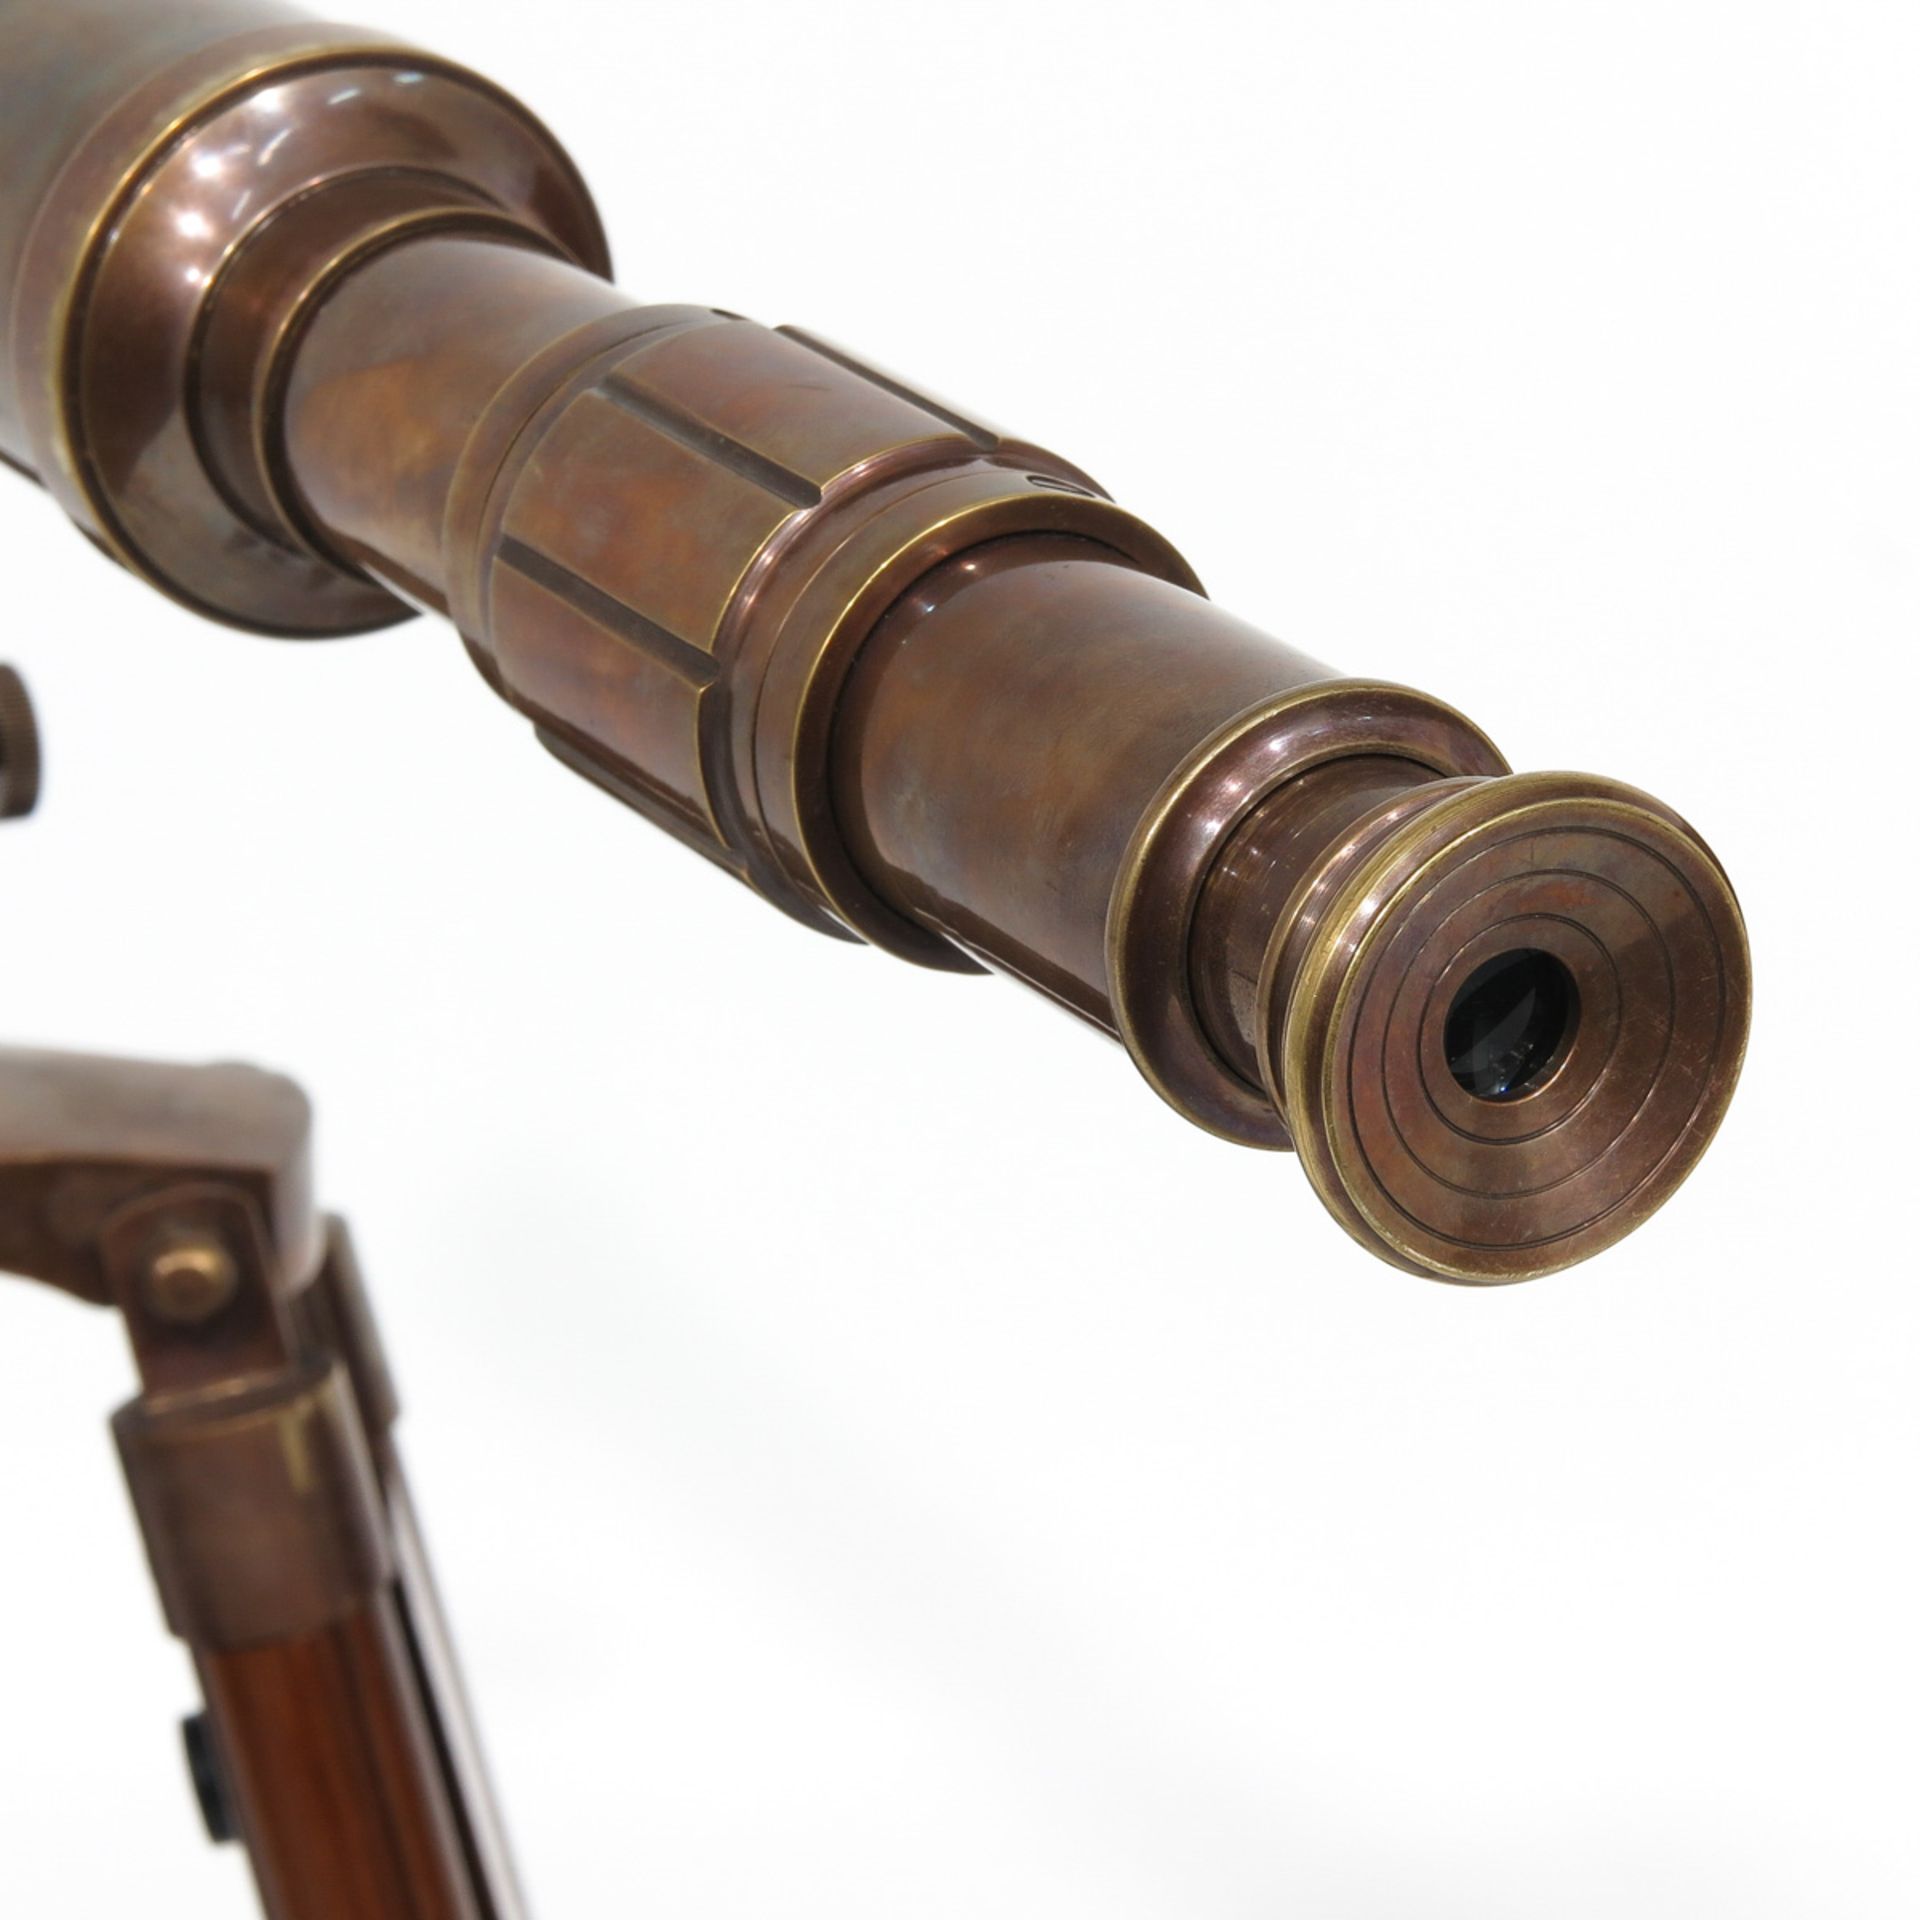 A Telescope Viewer - Image 8 of 10